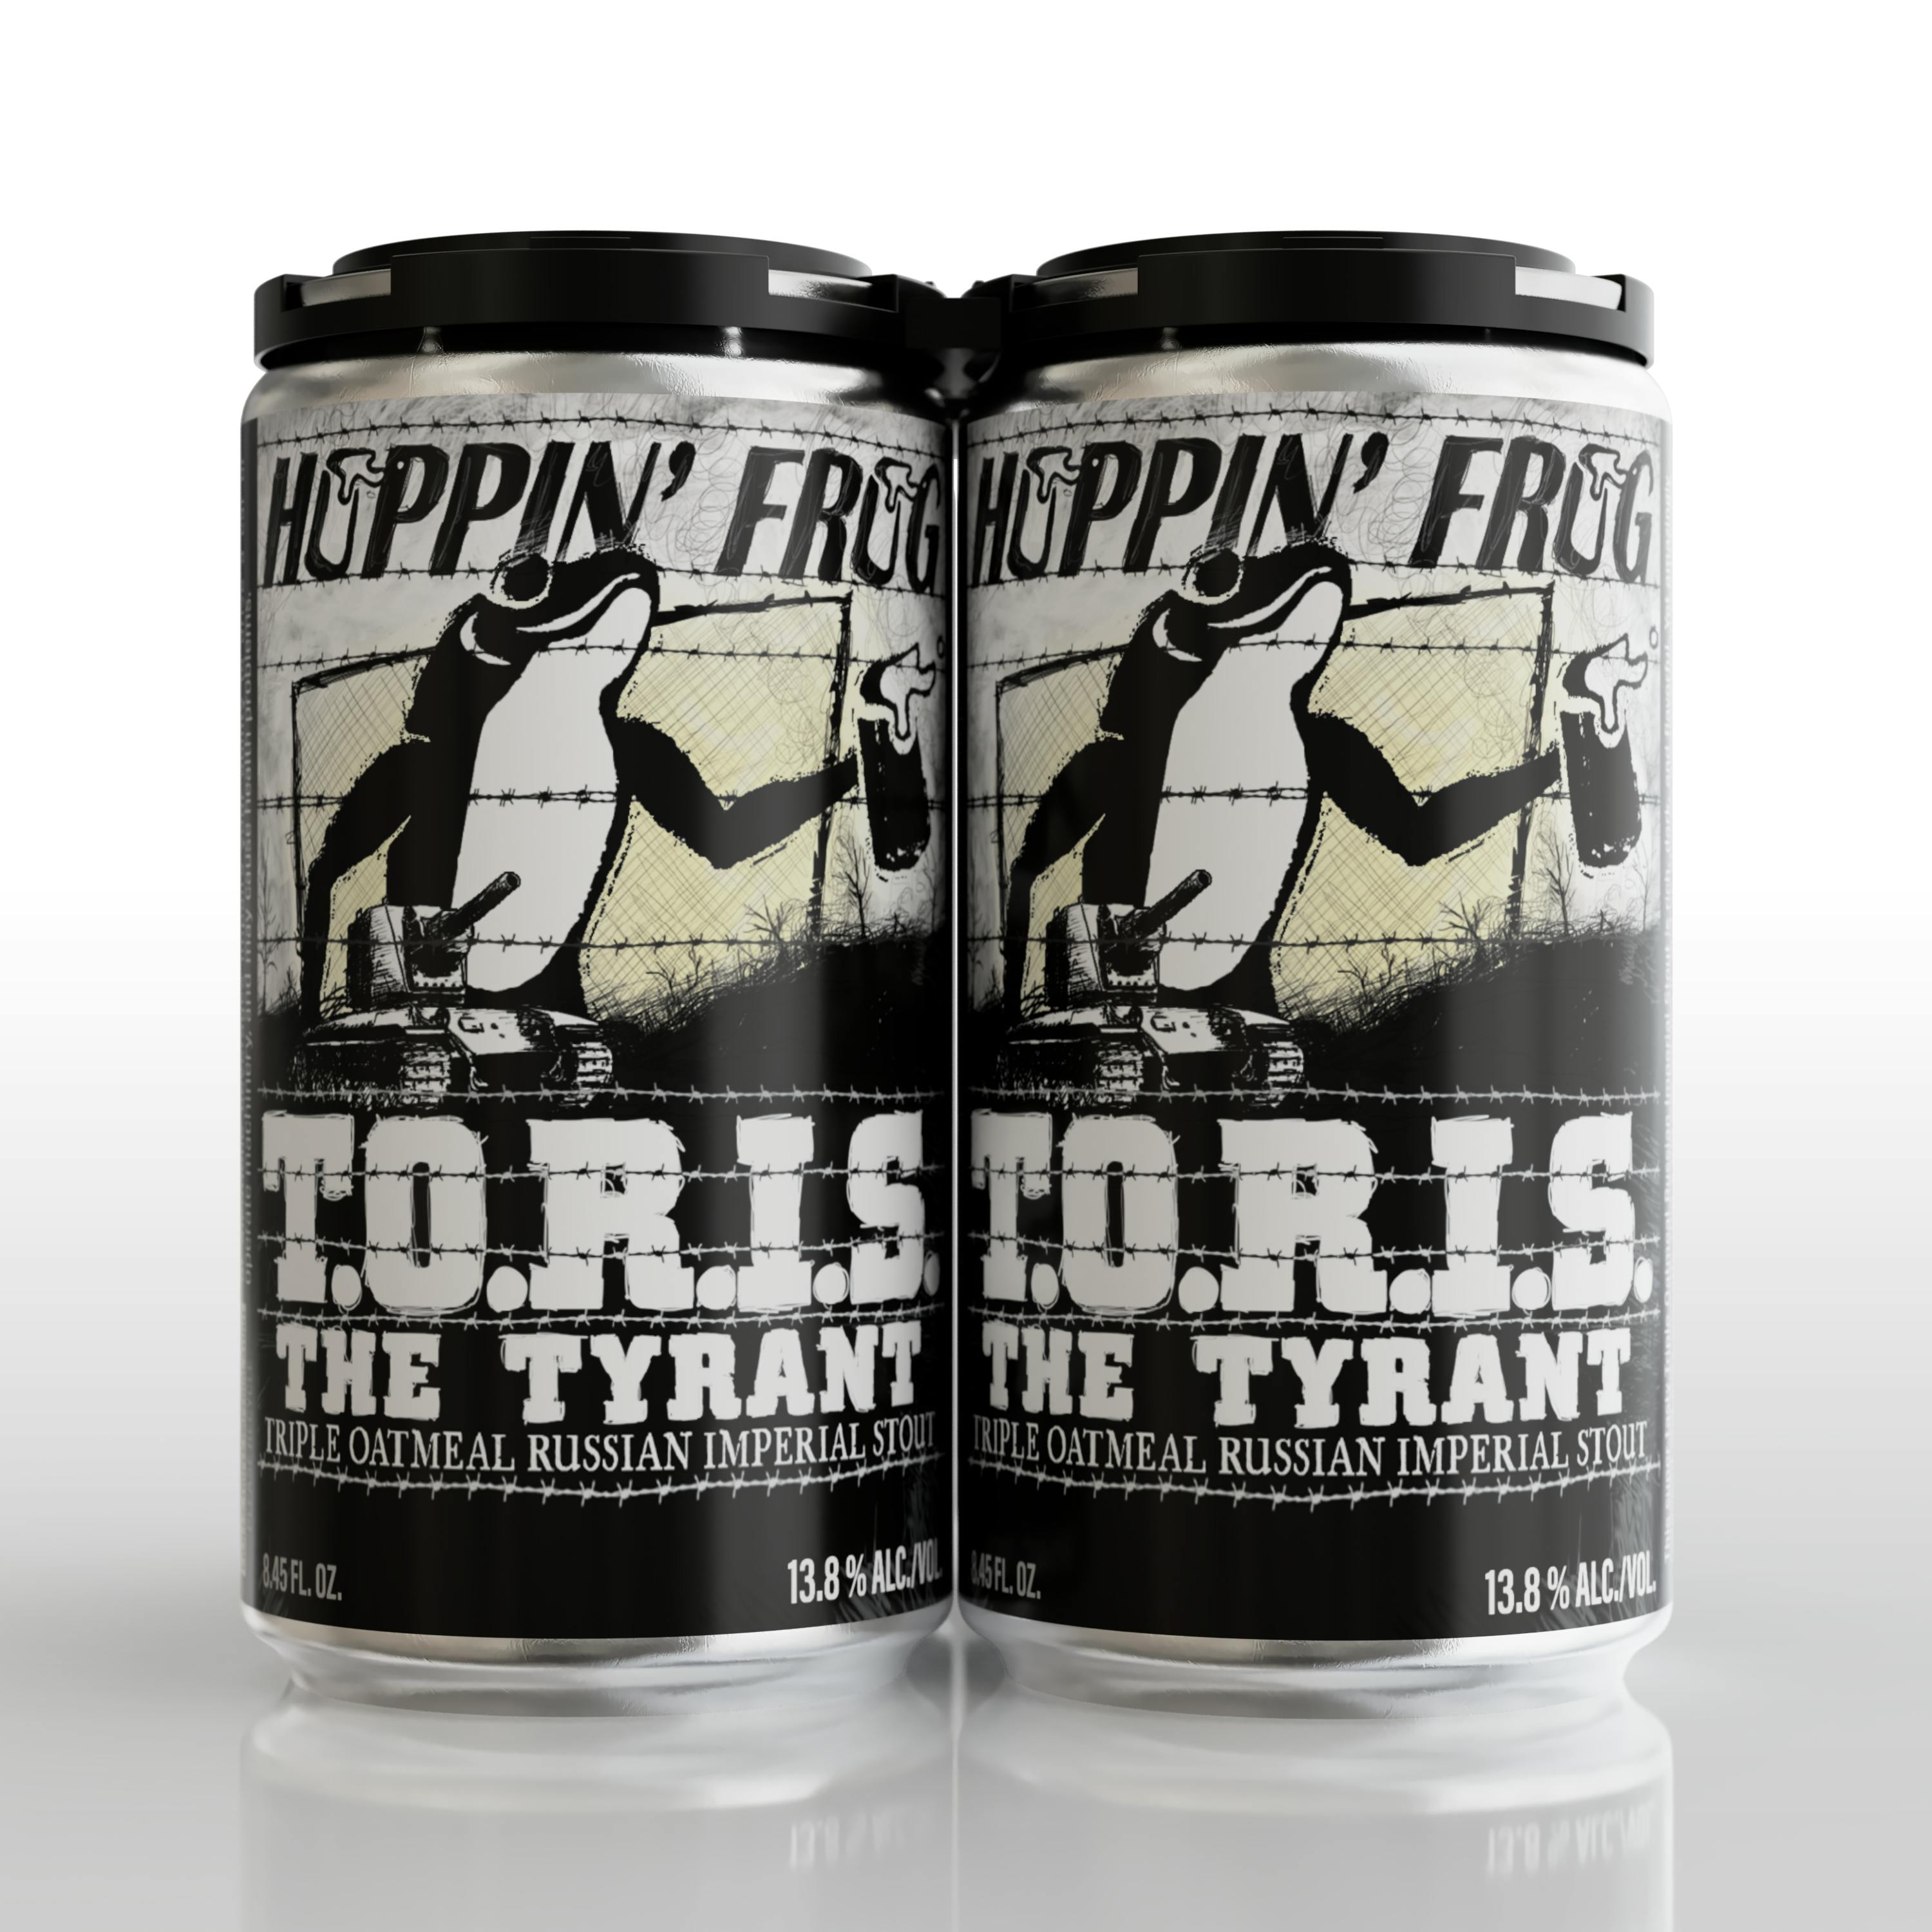 Hoppin' Frog Brewery T.O.R.I.S. The Tyrant